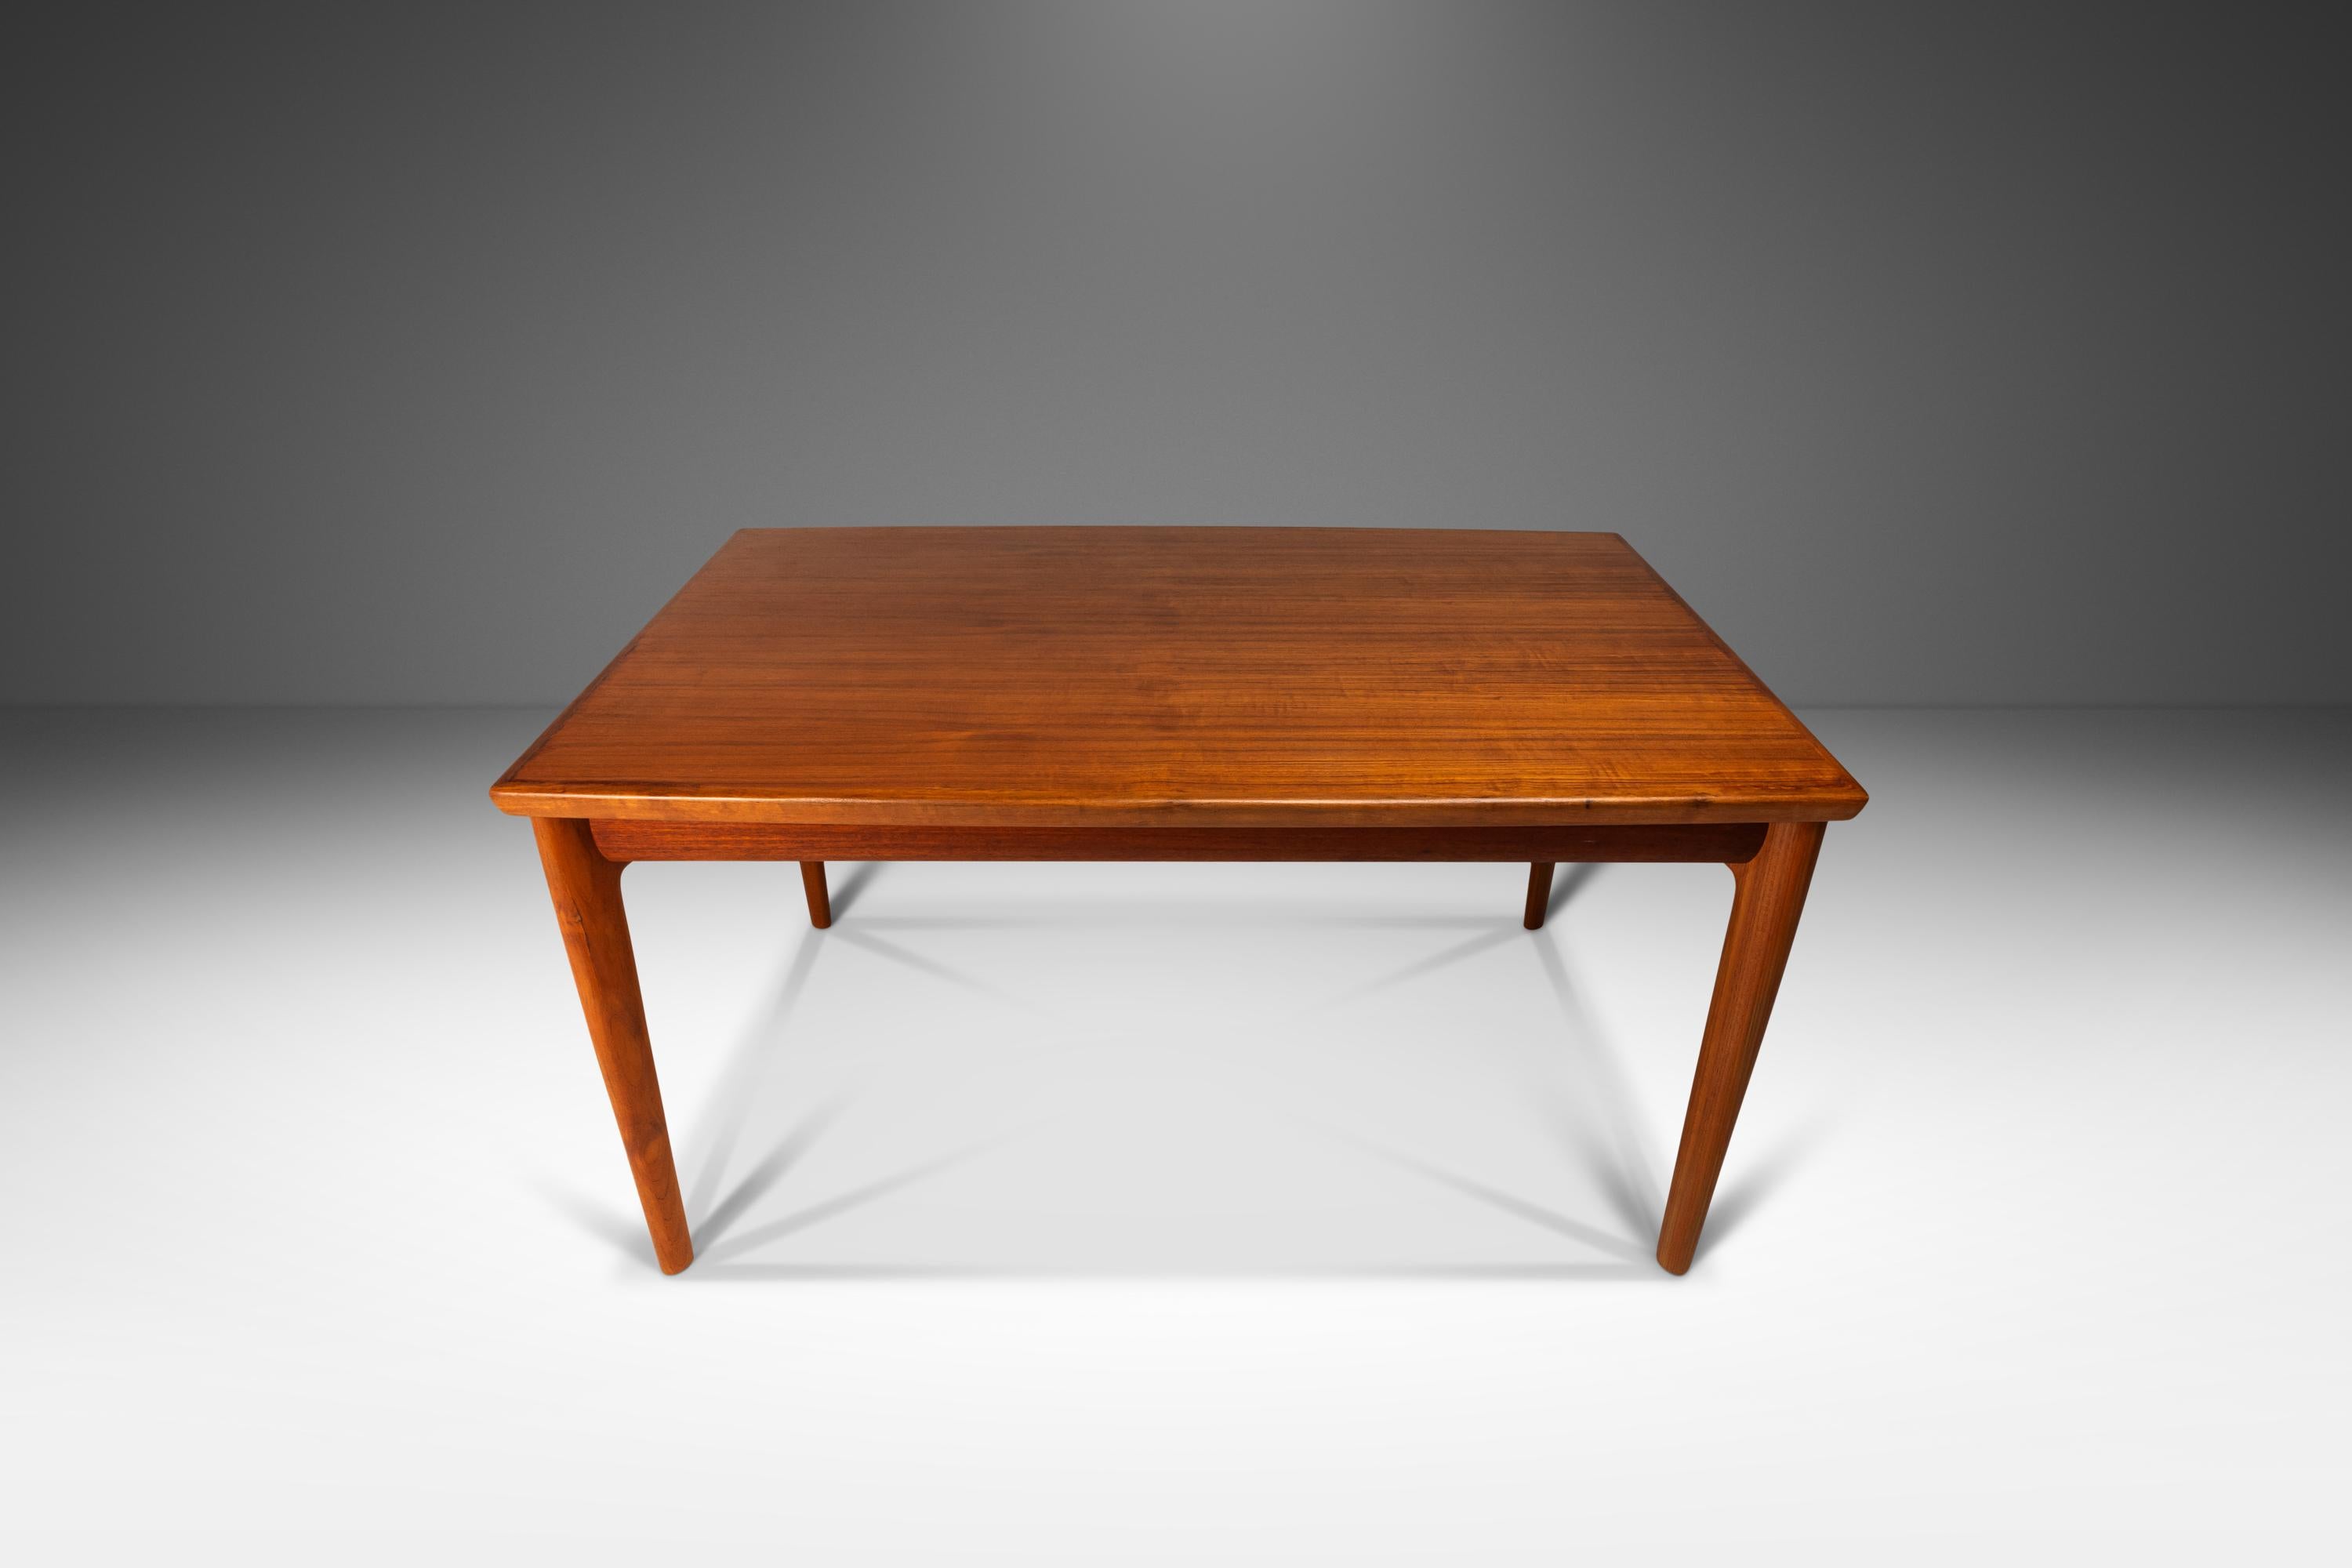 Mid-20th Century Danish Modern Expansion Dining Table in Teak w/ Stow-in-Table Leaves, c. 1960s For Sale